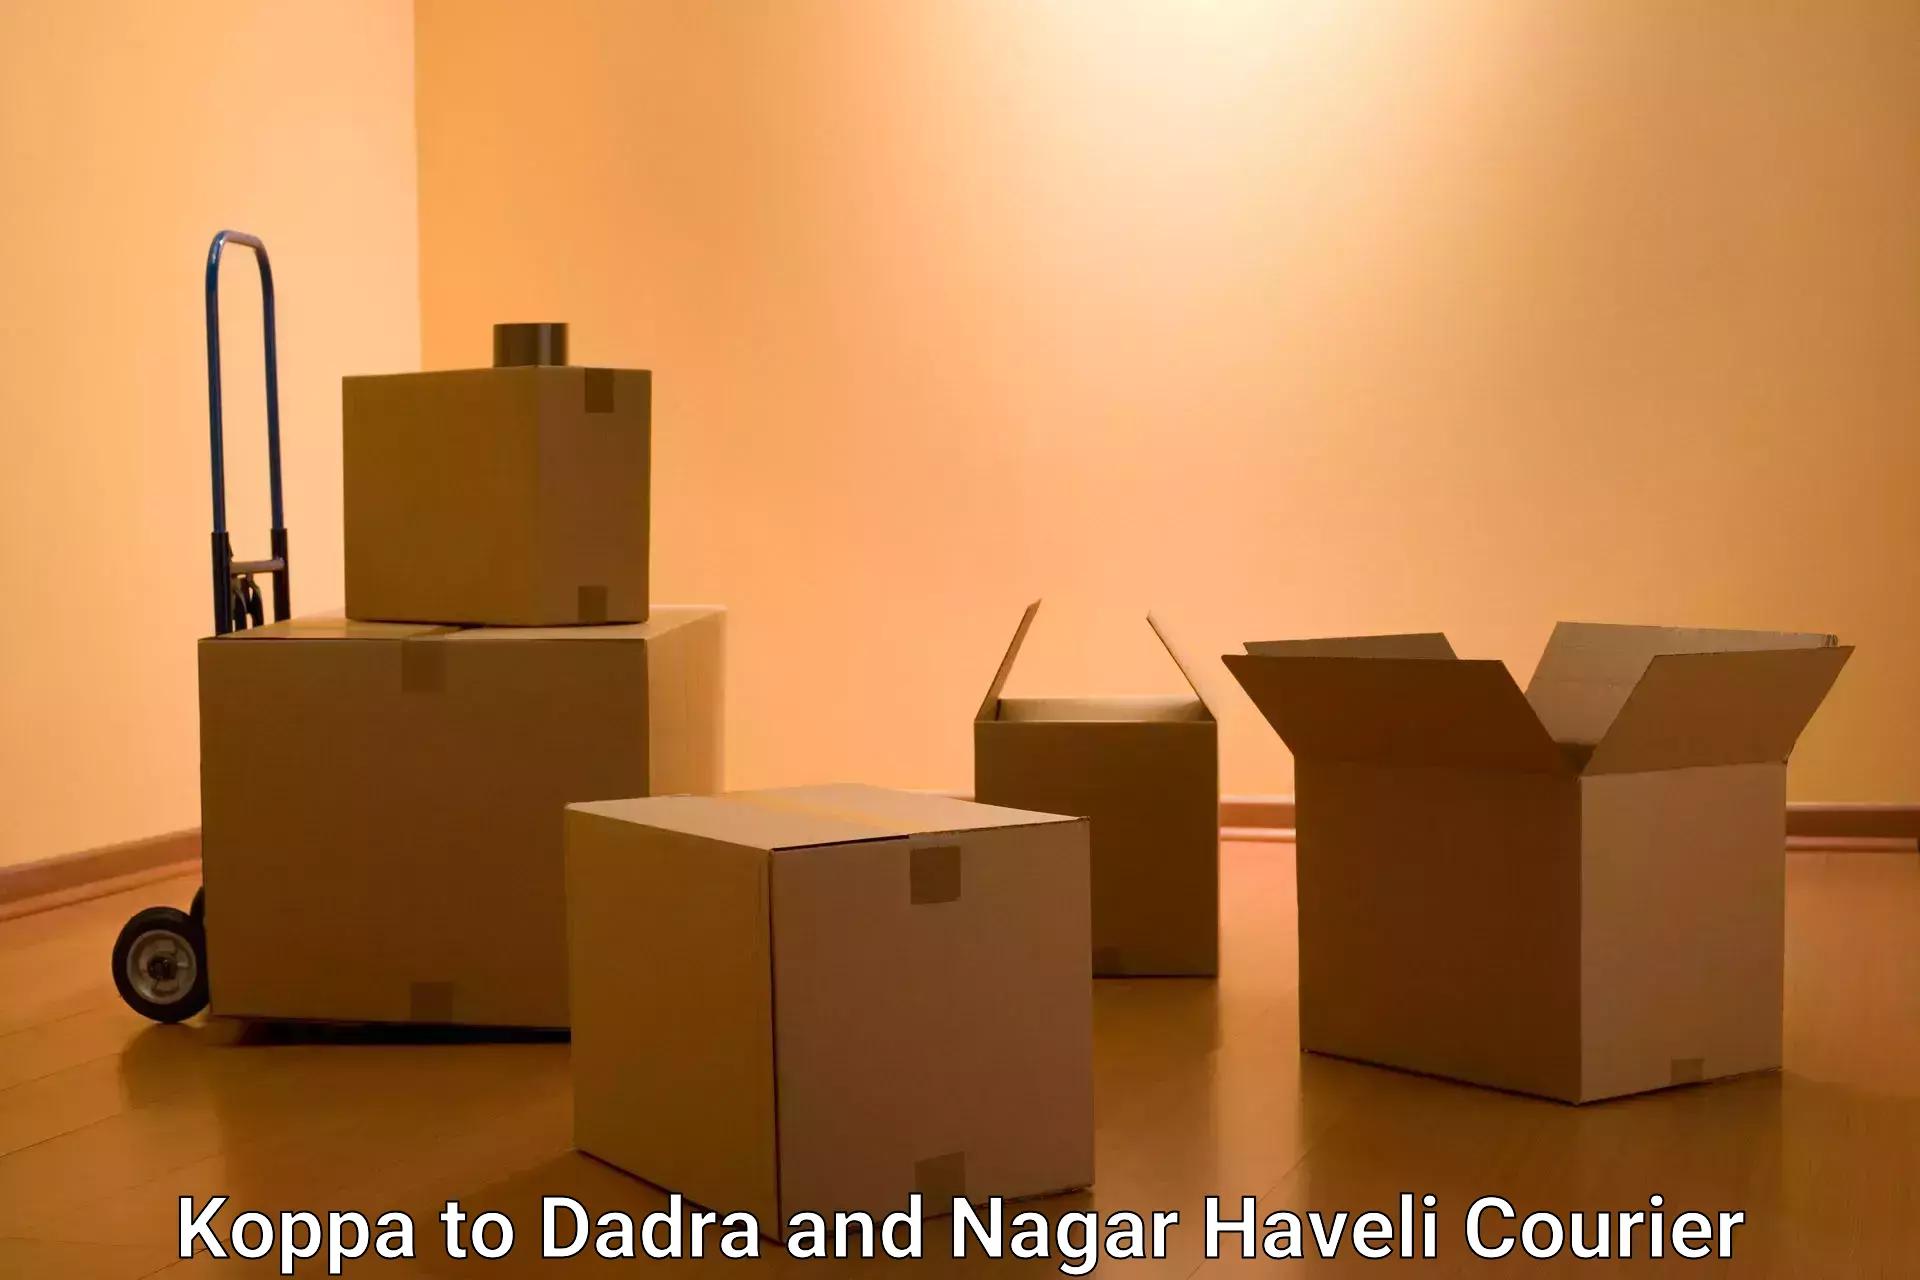 Ocean freight courier in Koppa to Dadra and Nagar Haveli